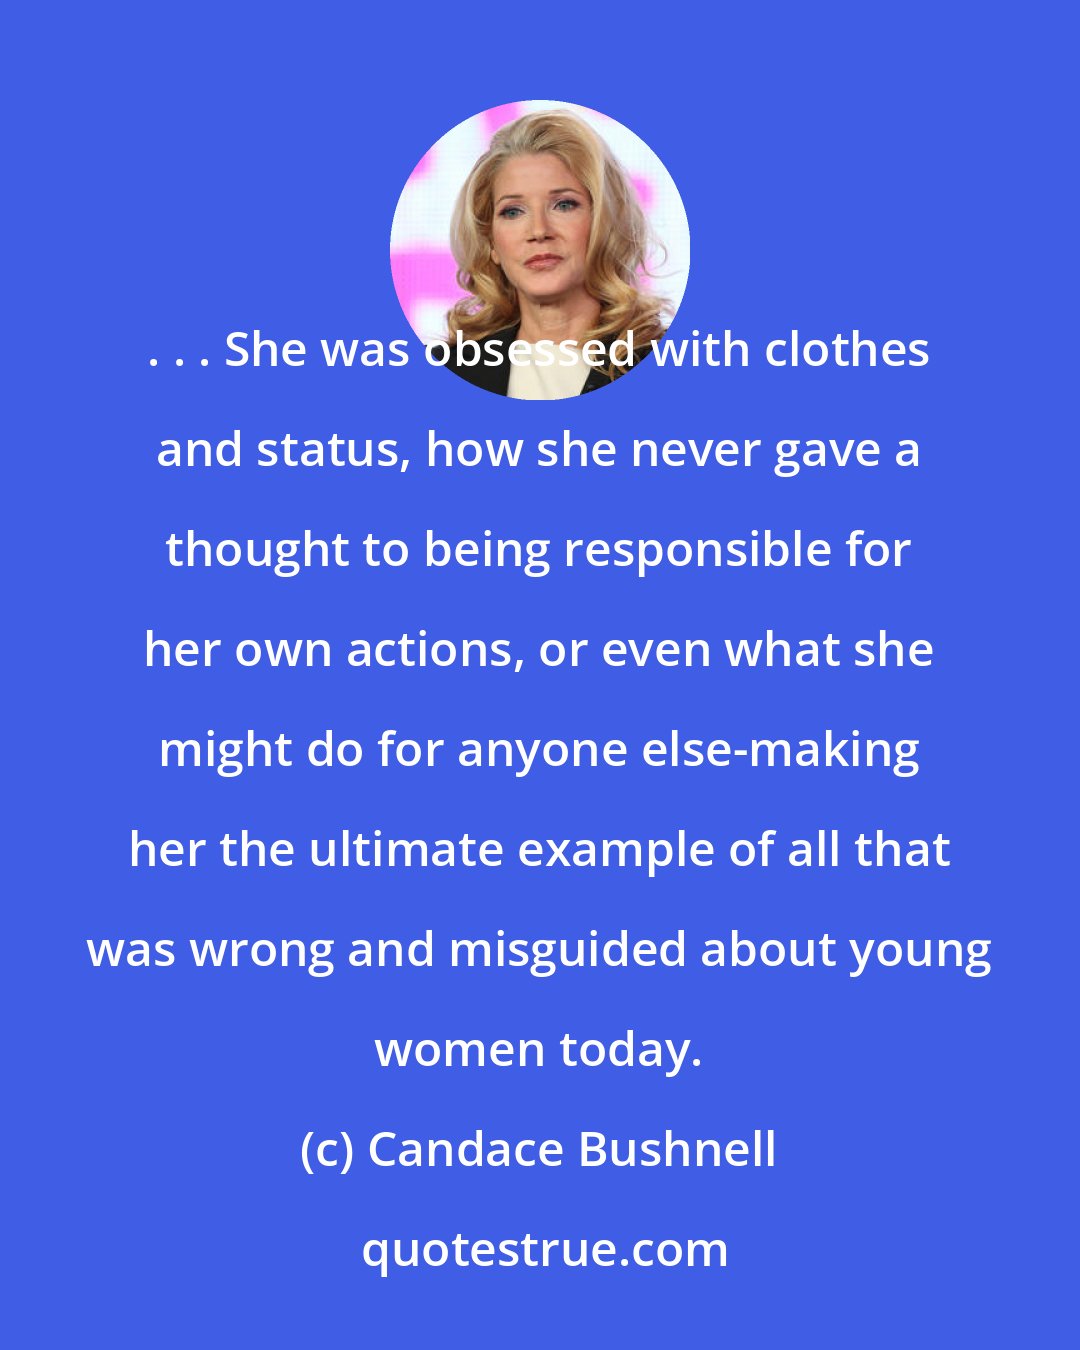 Candace Bushnell: . . . She was obsessed with clothes and status, how she never gave a thought to being responsible for her own actions, or even what she might do for anyone else-making her the ultimate example of all that was wrong and misguided about young women today.